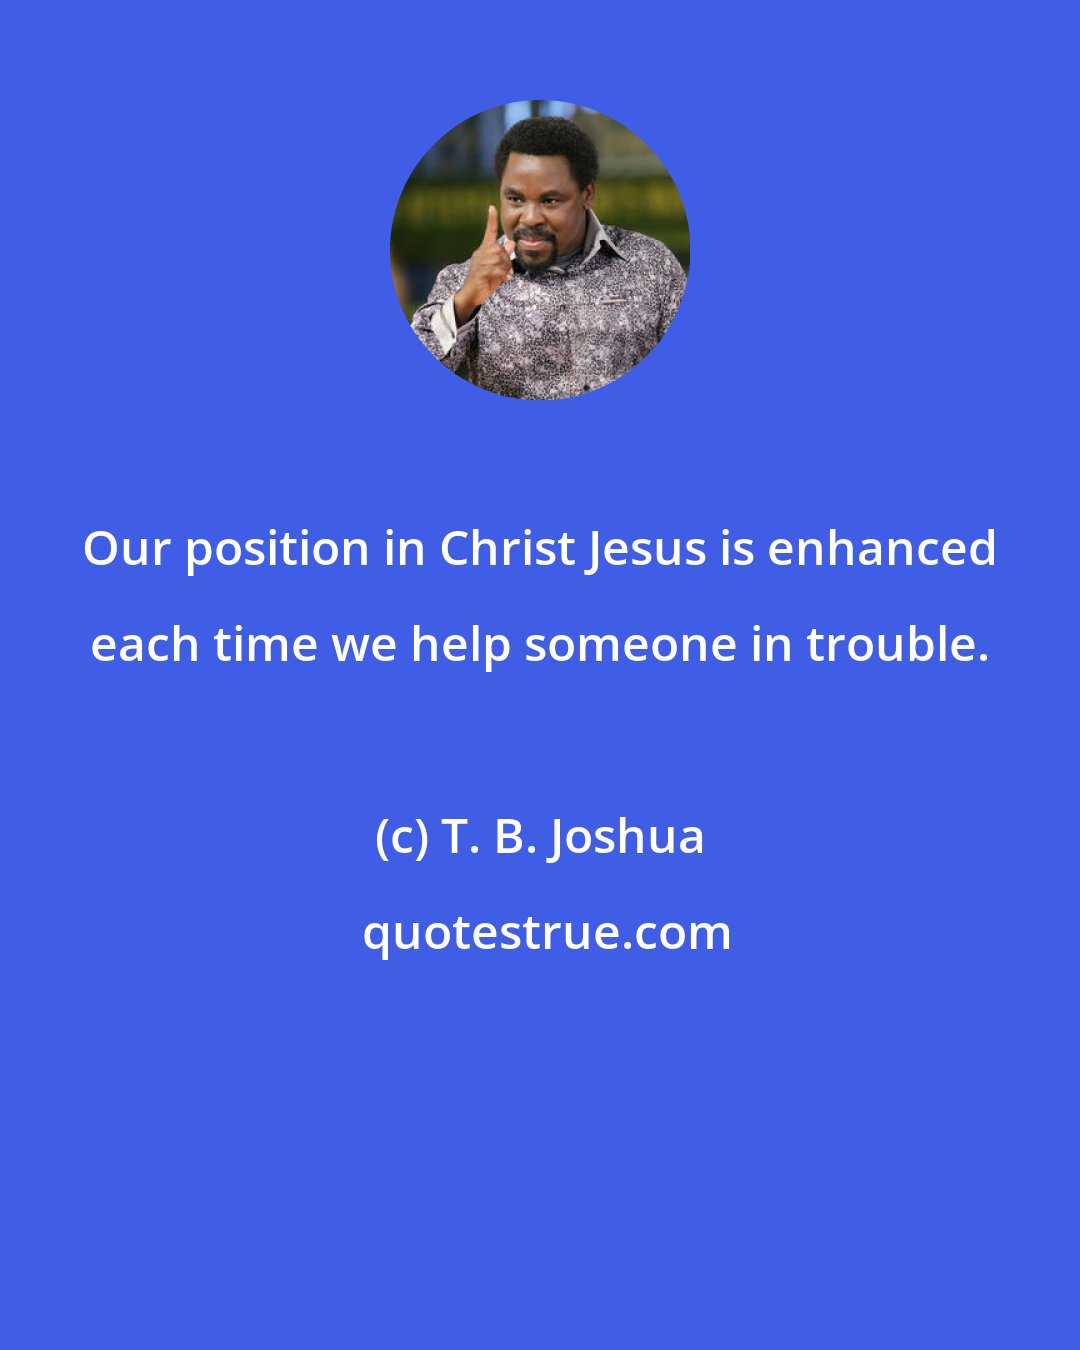 T. B. Joshua: Our position in Christ Jesus is enhanced each time we help someone in trouble.